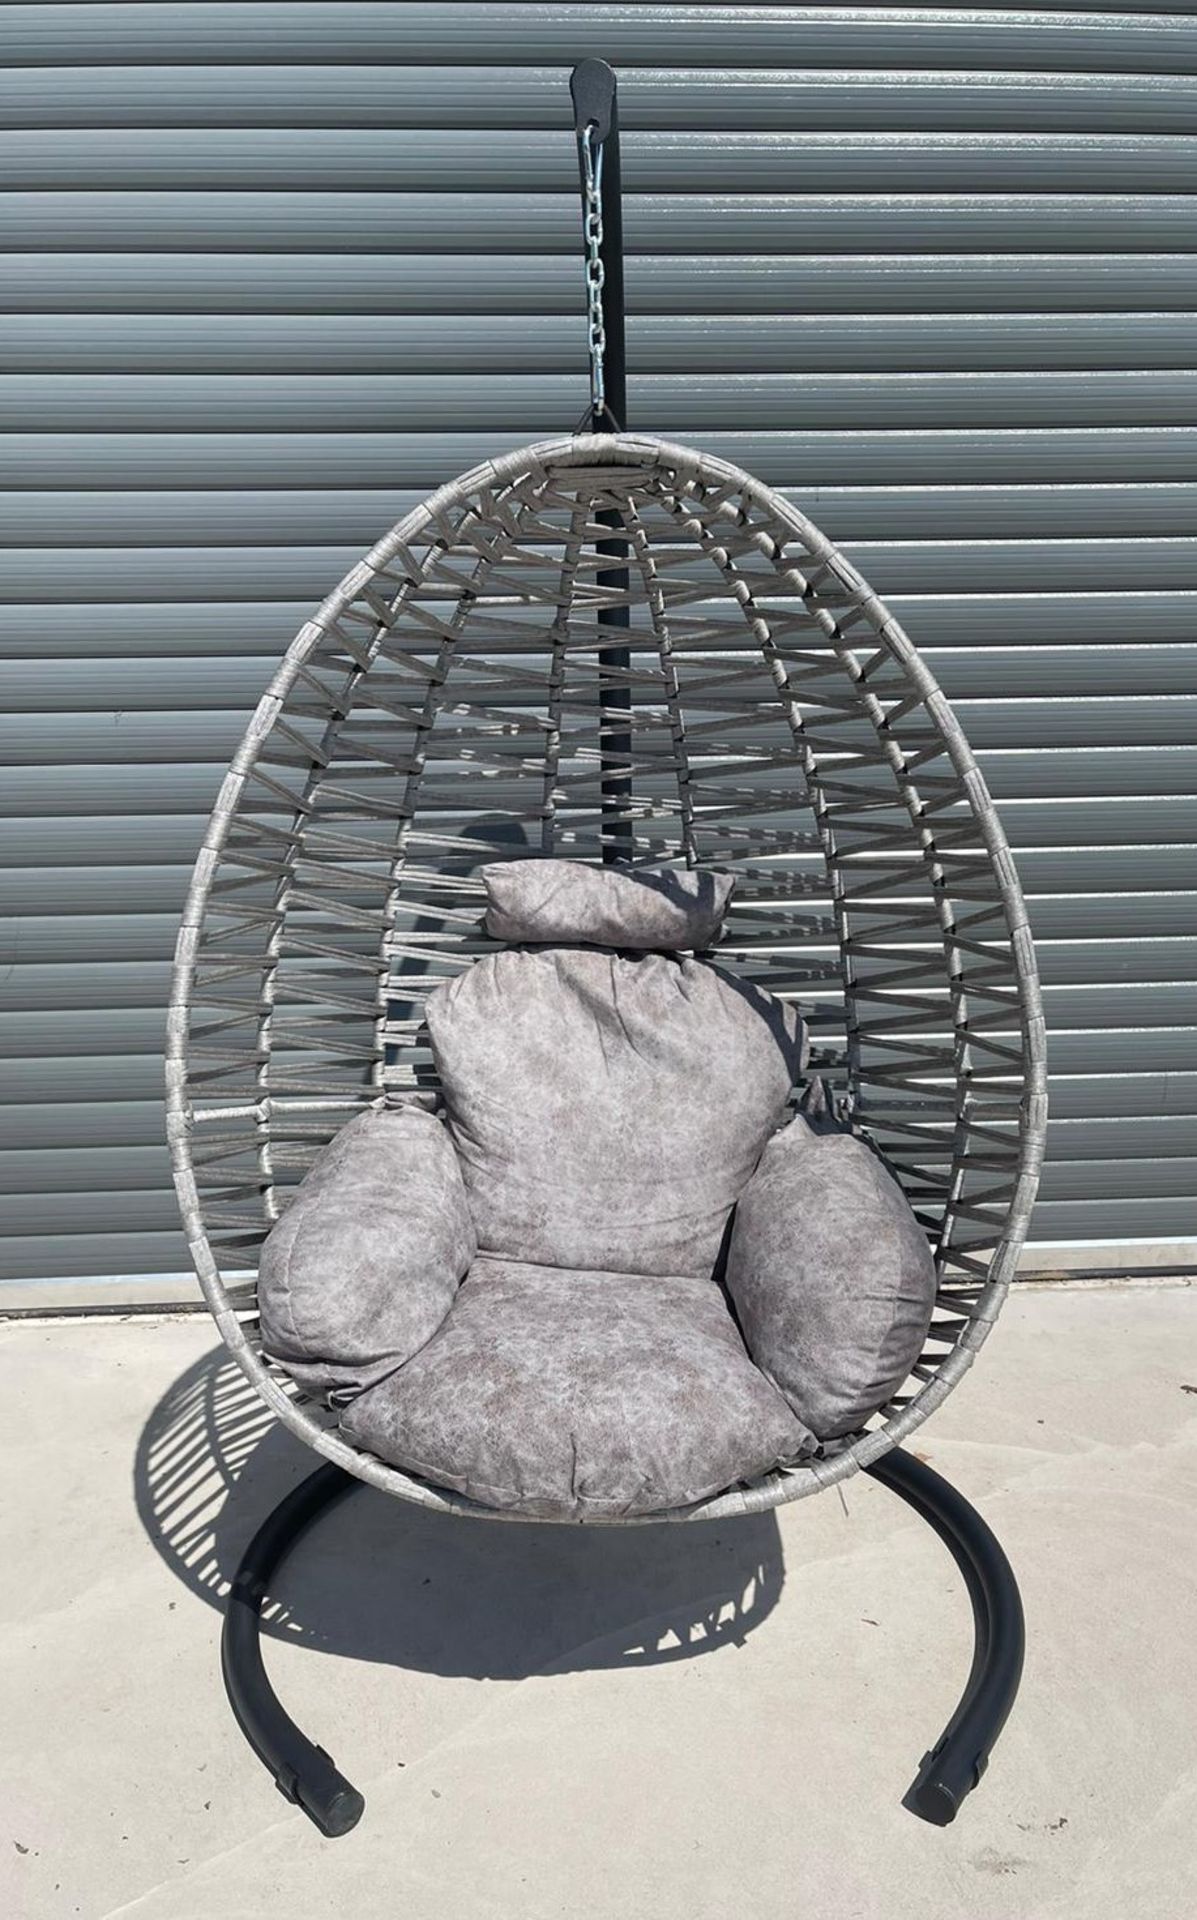 RRP £399 - Large Grey Woven Indoor/Outdoor Swinging Egg Chair - Our egg chair provides portable and